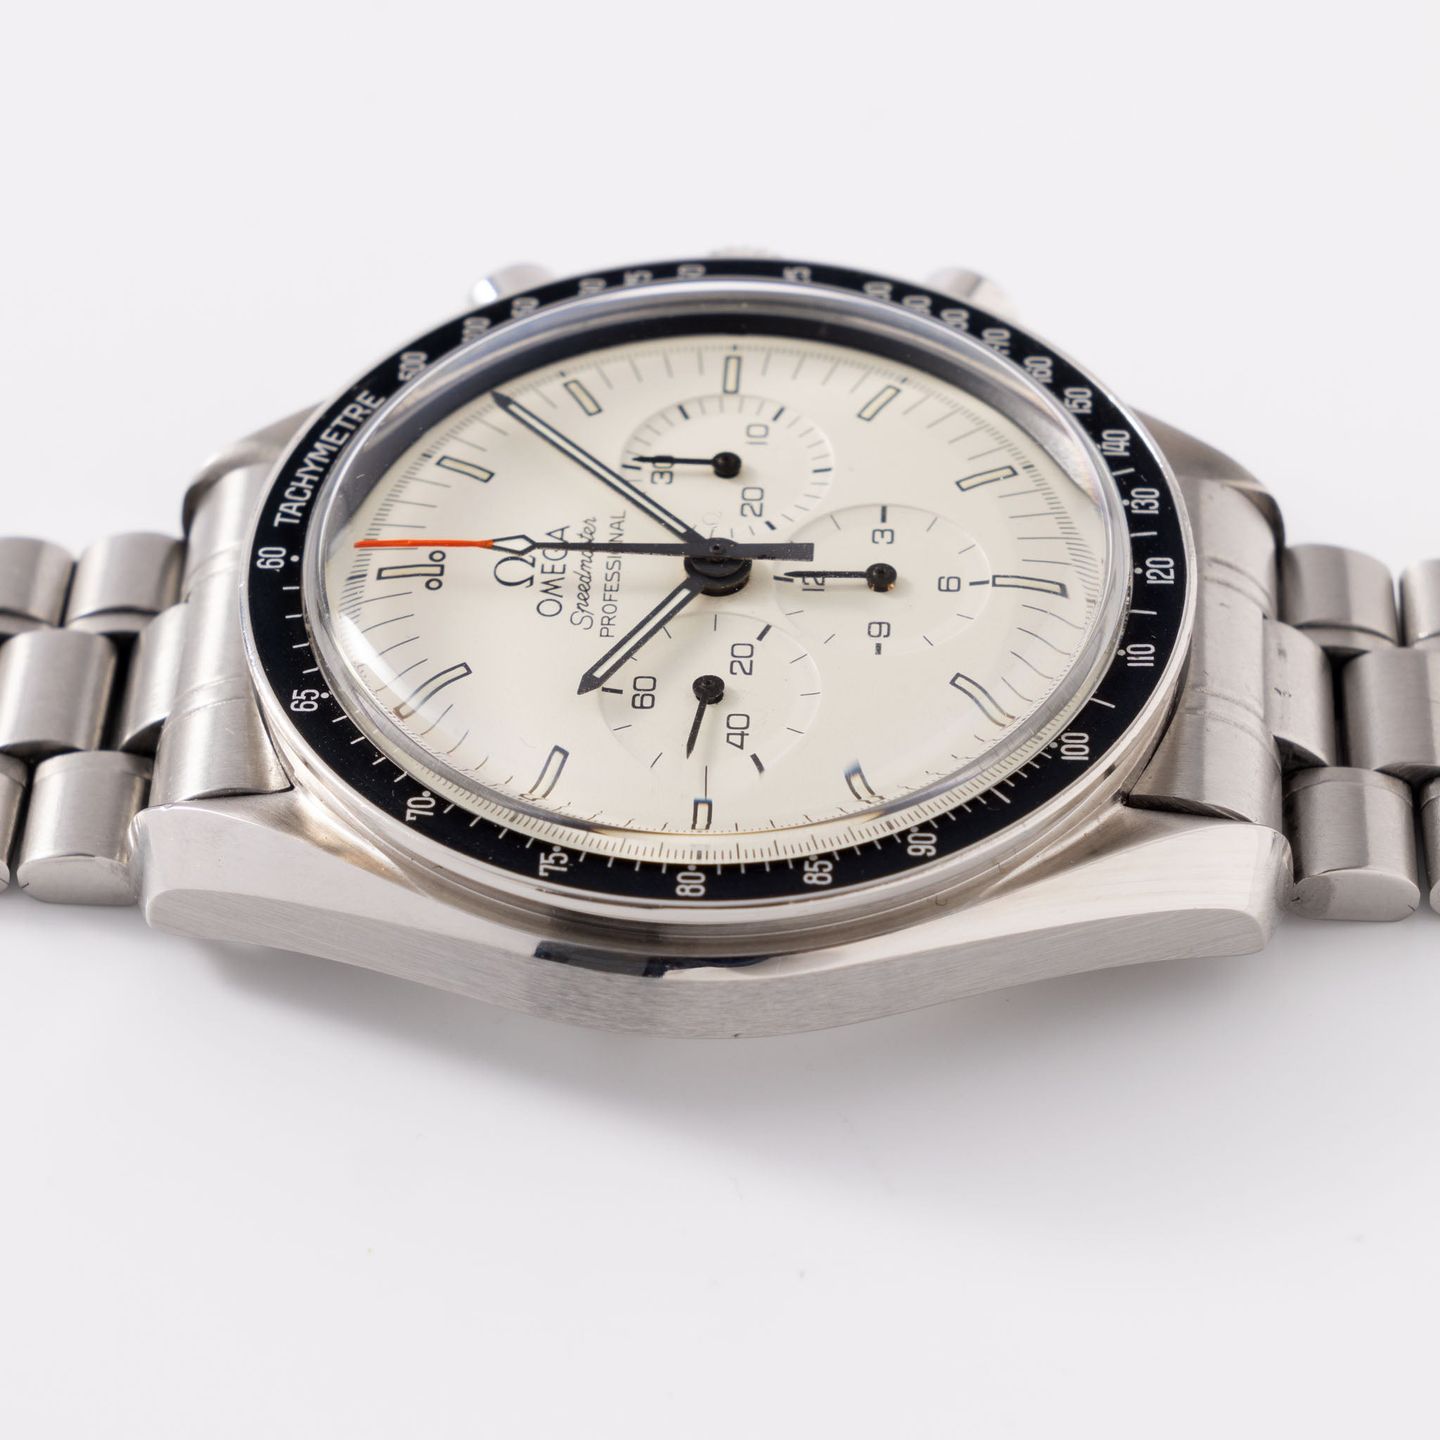 Omega Speedmaster Professional Moonwatch 145.022 (1970) - White dial 42 mm Steel case (7/8)